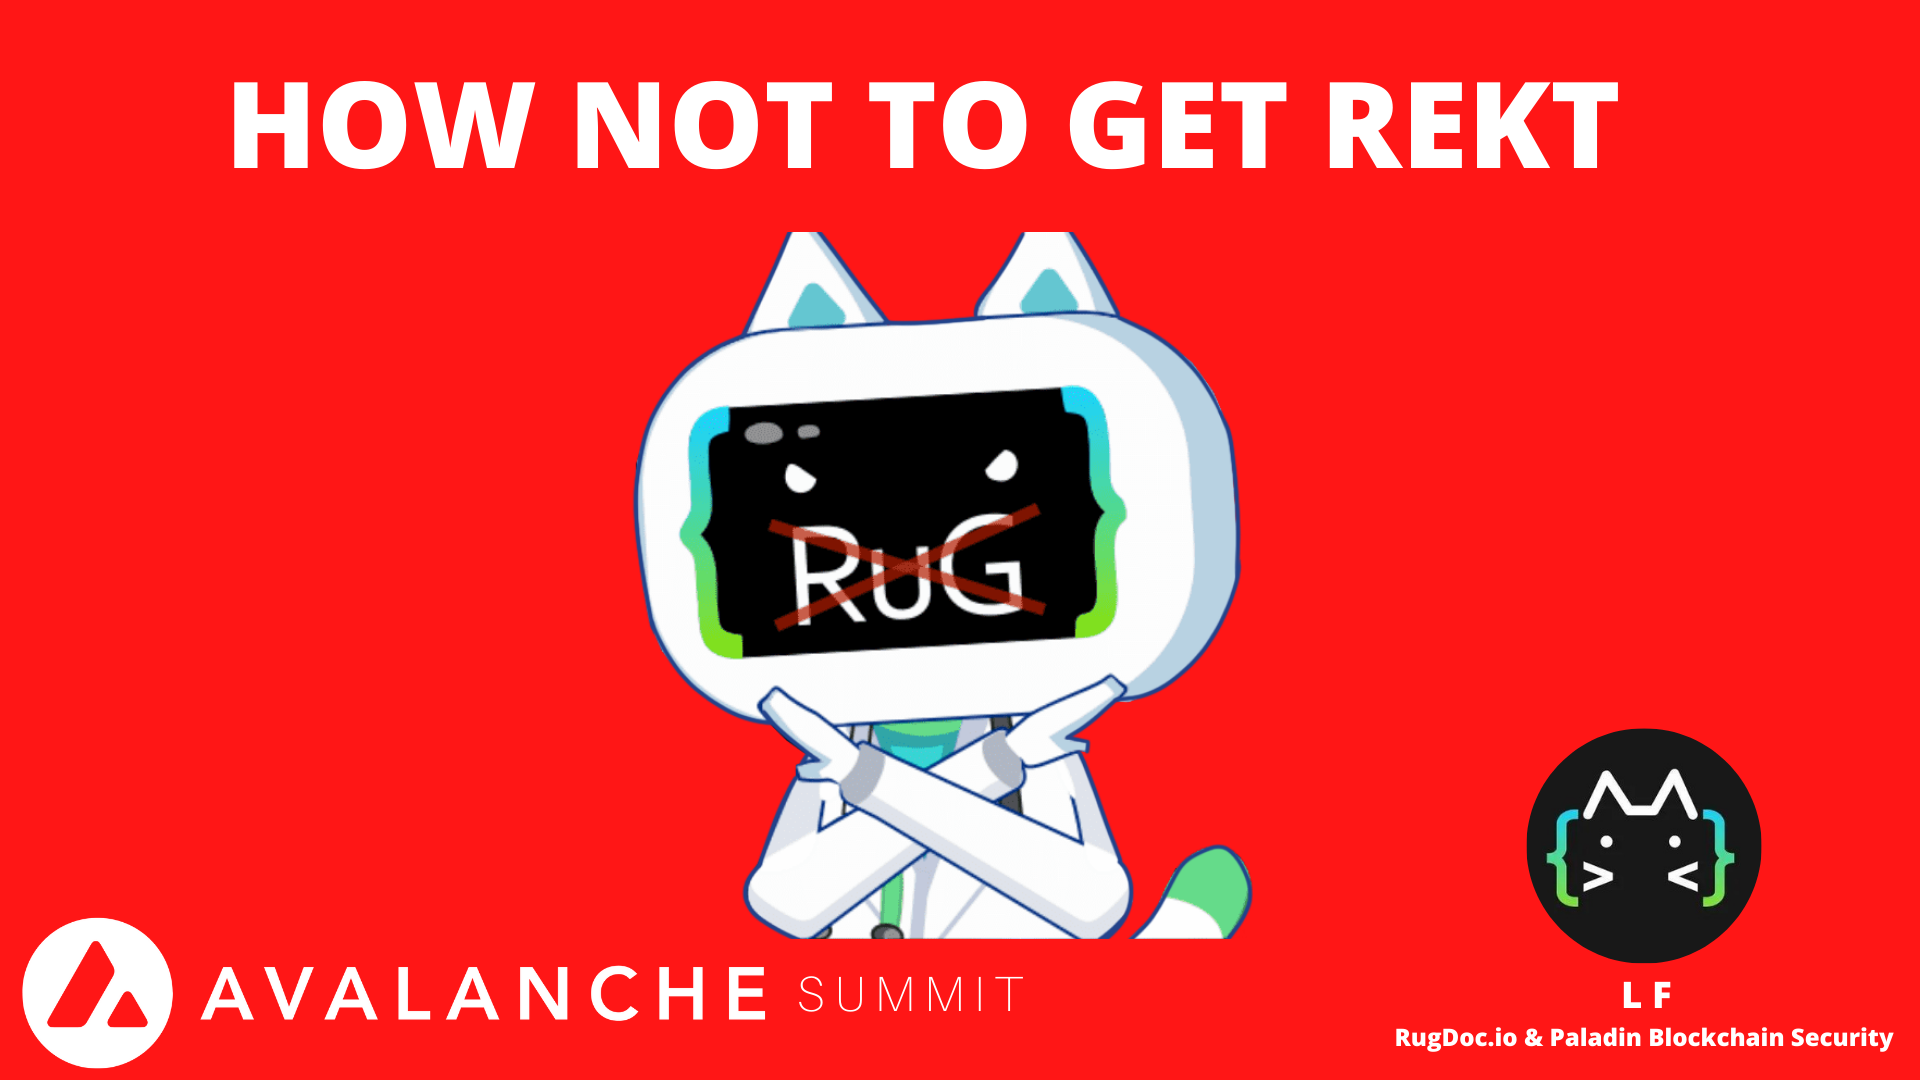 Avalanche Summit: Scams And How To Not Get Rekt In The World Of Decentralized Finance